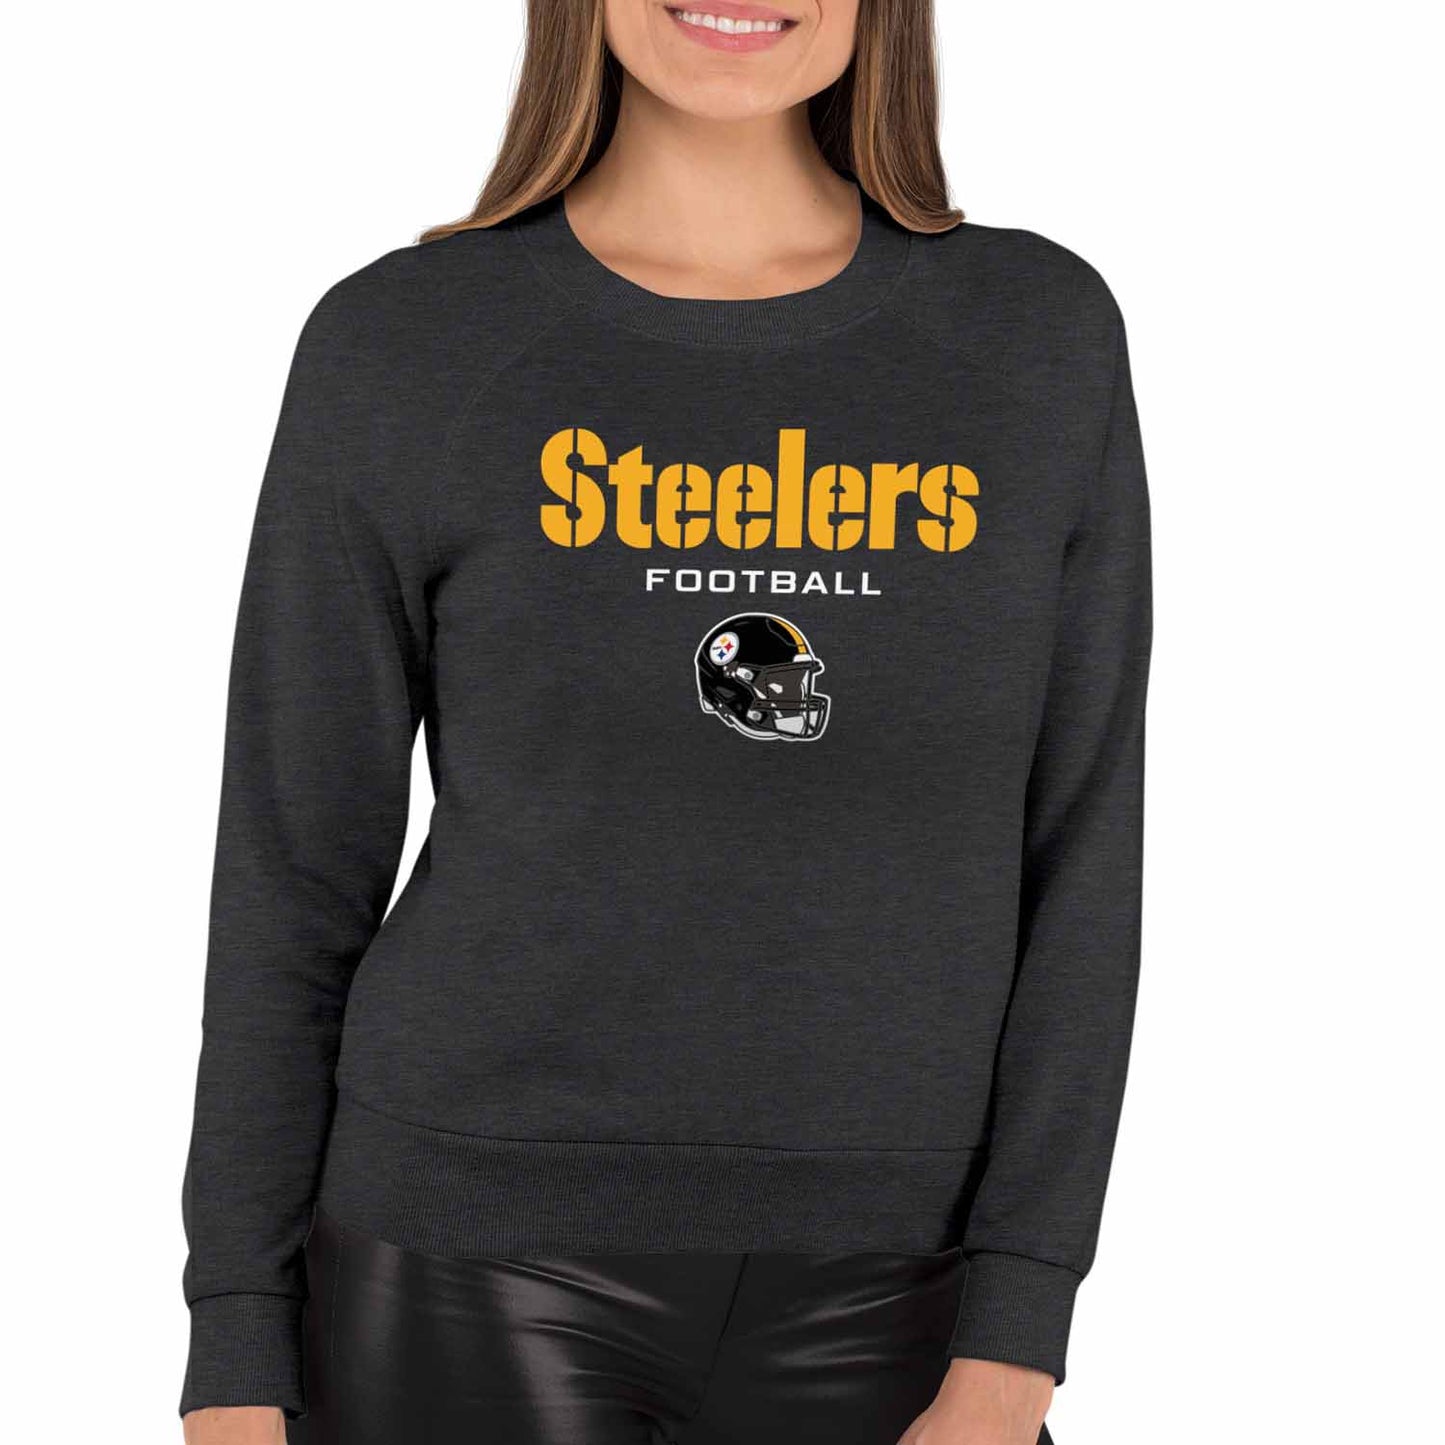 Pittsburgh Steelers Women's NFL Football Helmet Charcoal Slouchy Crewneck -Tagless Lightweight Pullover - Charcoal